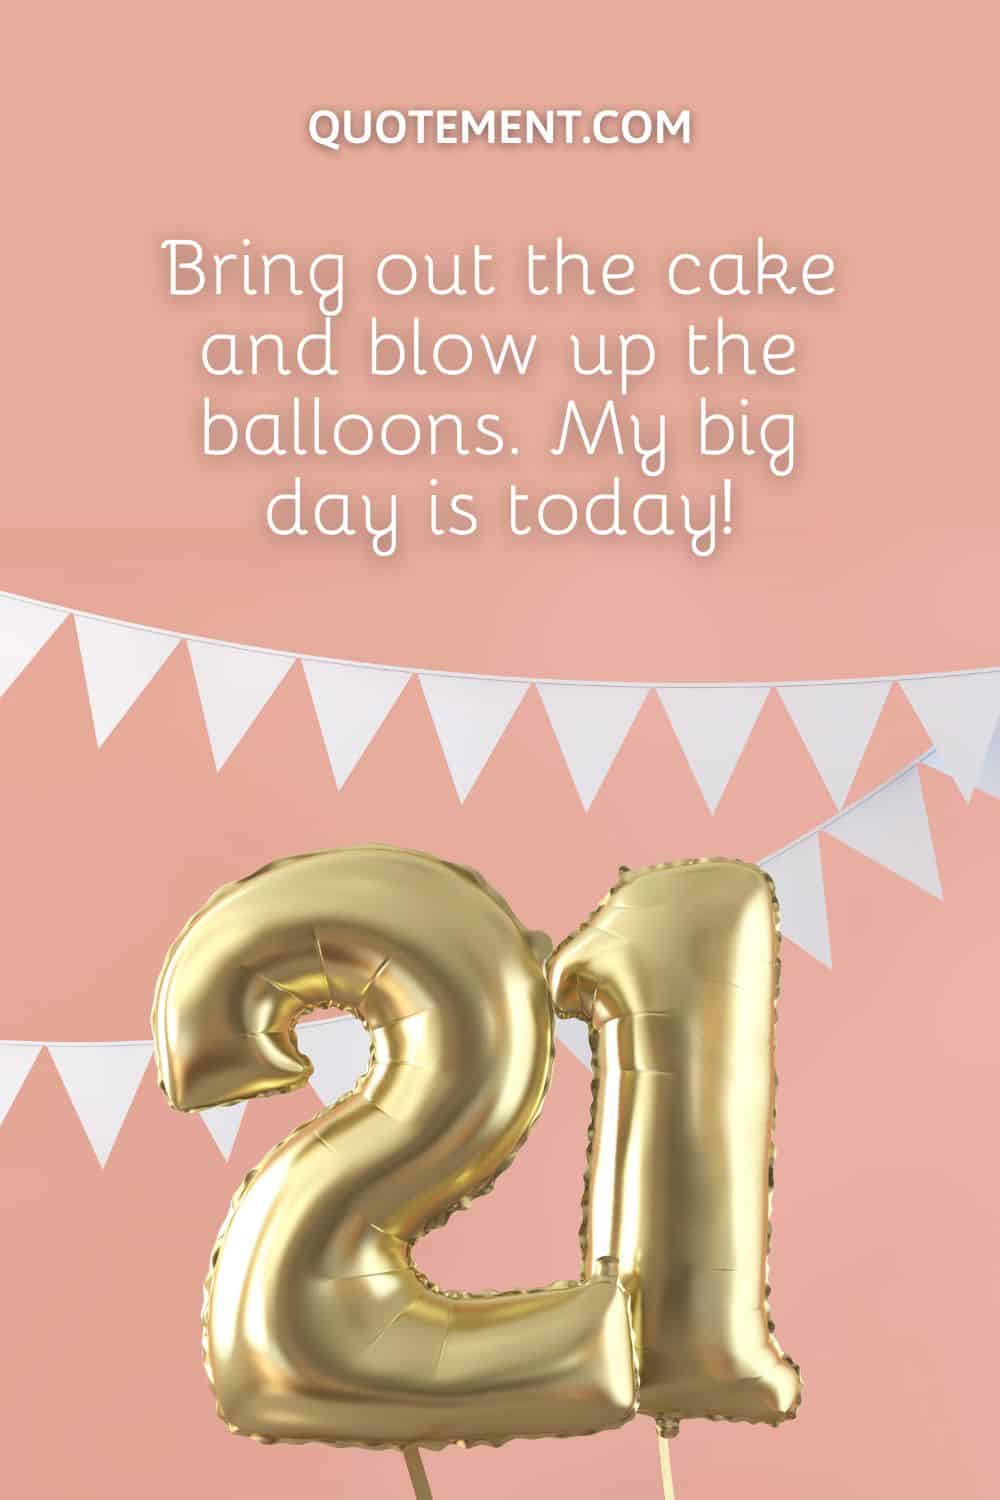 Bring out the cake and blow up the balloons